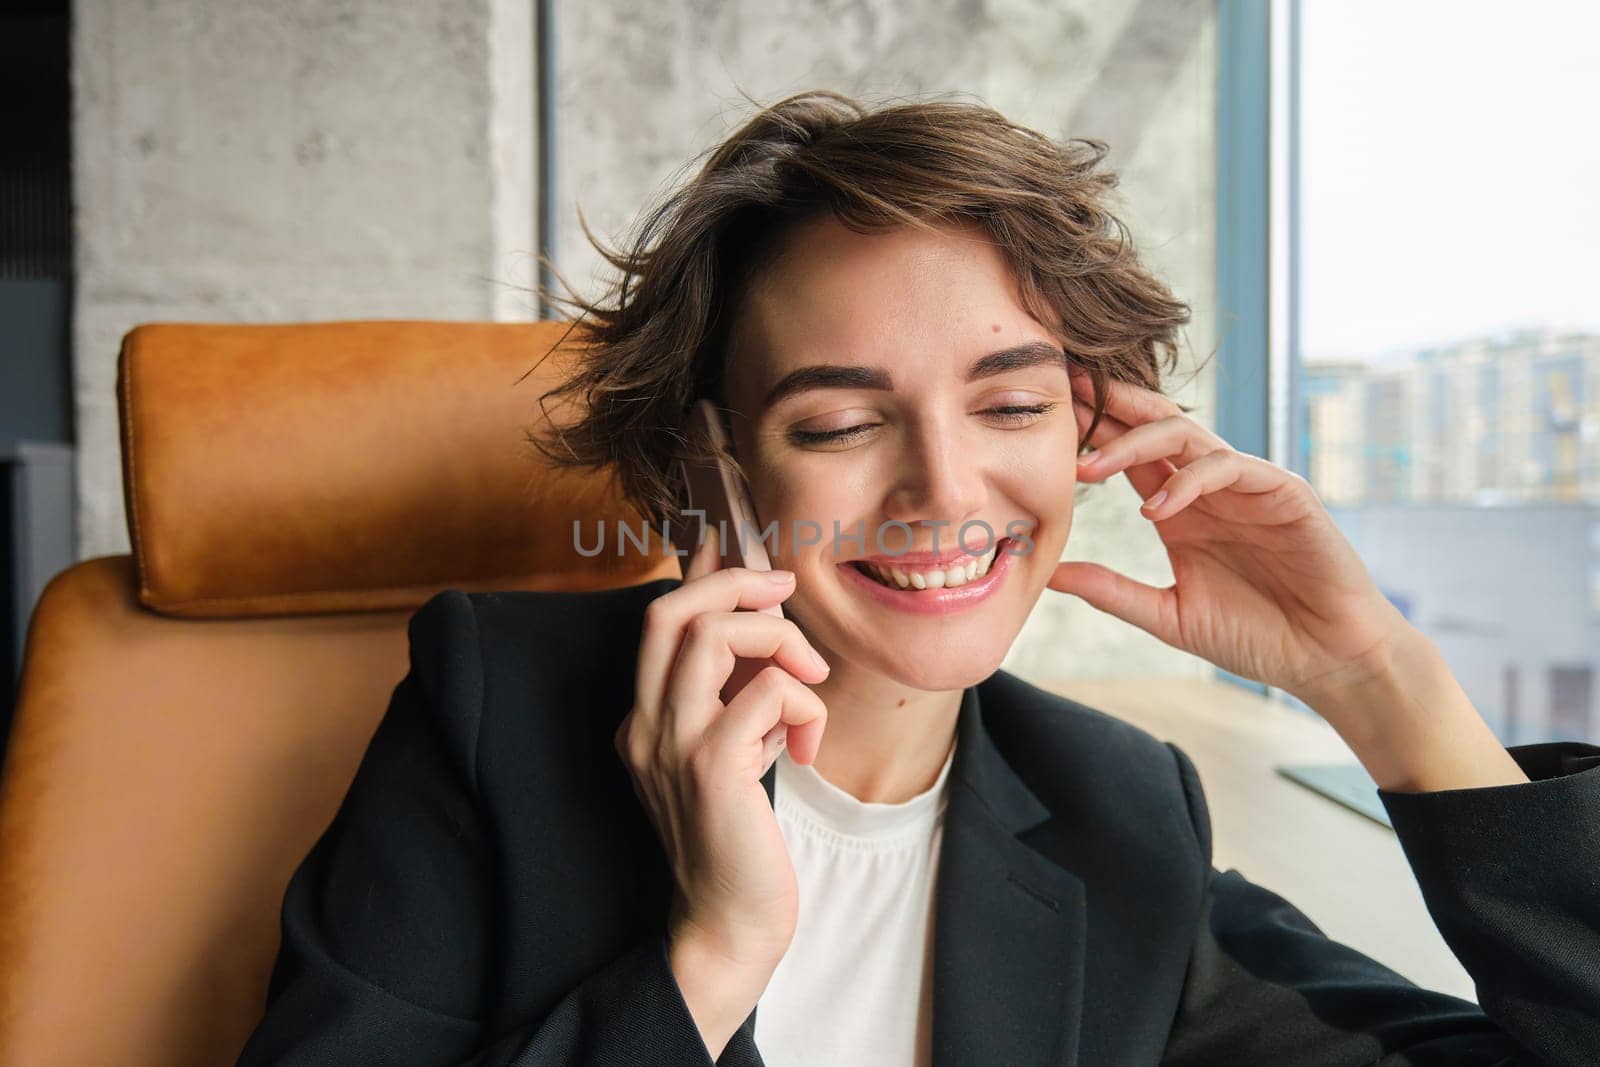 Close up portrait of corporate woman laughing and smiling, talking over the phone, sitting in office.